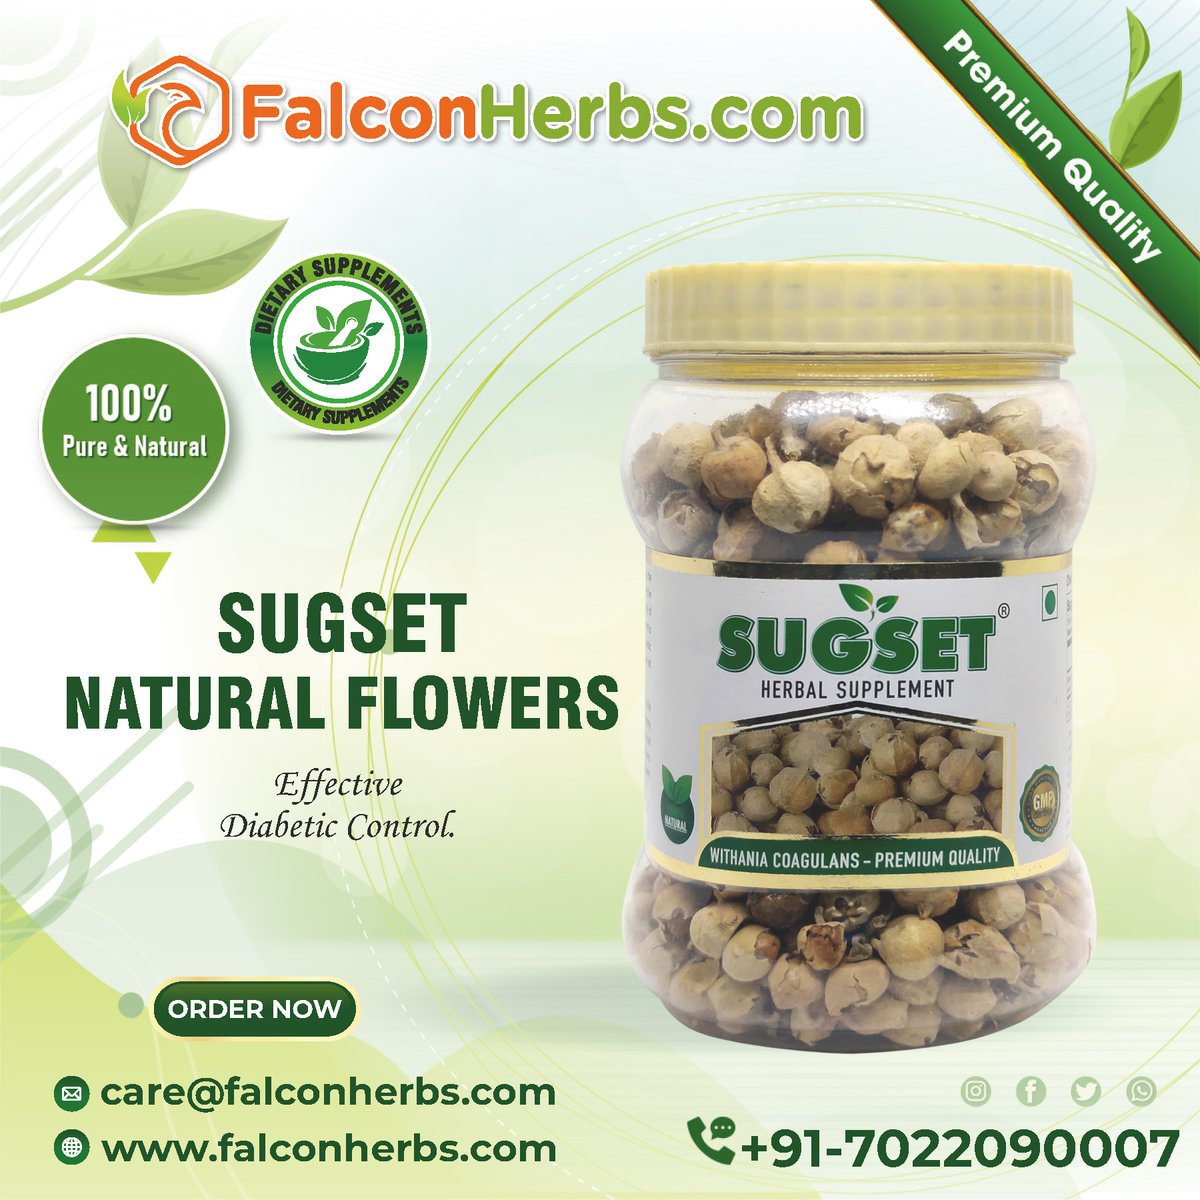 Sugset Natural Flowers Ultimate Solution for Diabetes
Order Now: falconherbs.com/product/sugset…
📞: 70220 90007
#DiabetesSolution #EmpowerYourself #ayurvedaeveryday #ayurvedicwellness #naturalhealth #healthylifestyle #fitness #OrganicLiving #bestprice #NaturalHealing